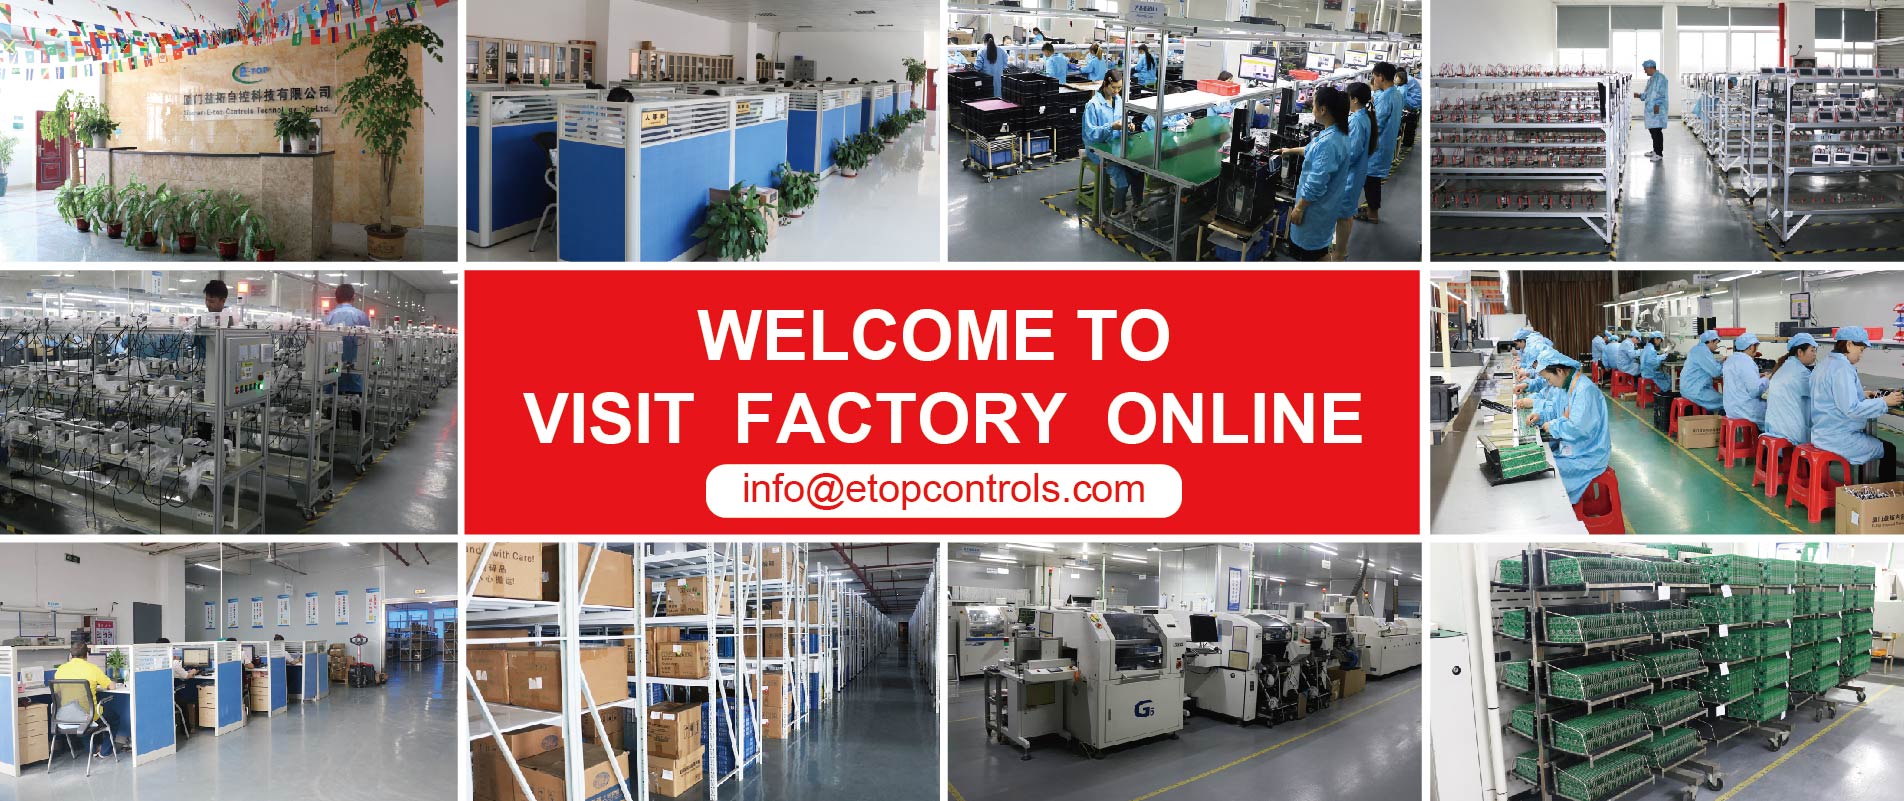 WELCOME TO  VISIT  FACTORY  ONLINE